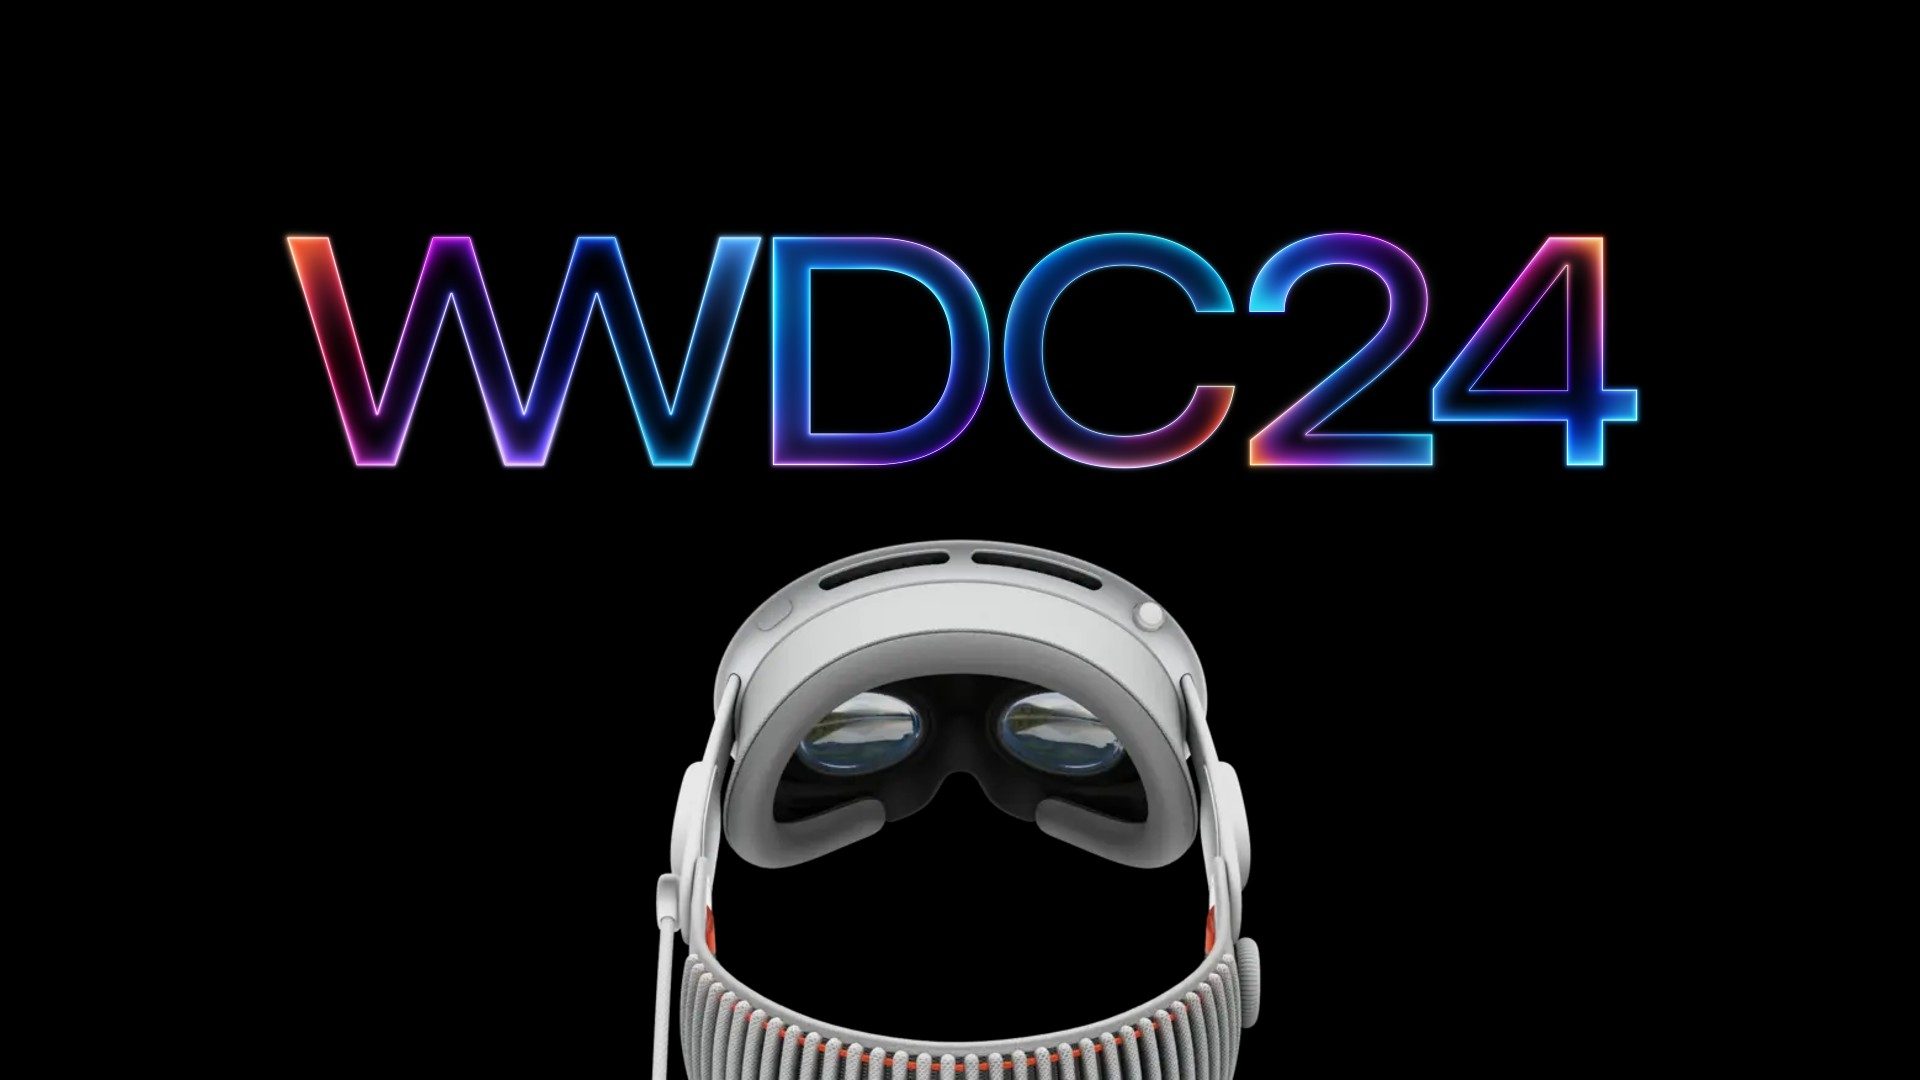 Apple Announces WWDC 2024 With Plans To Highlight "visionOS